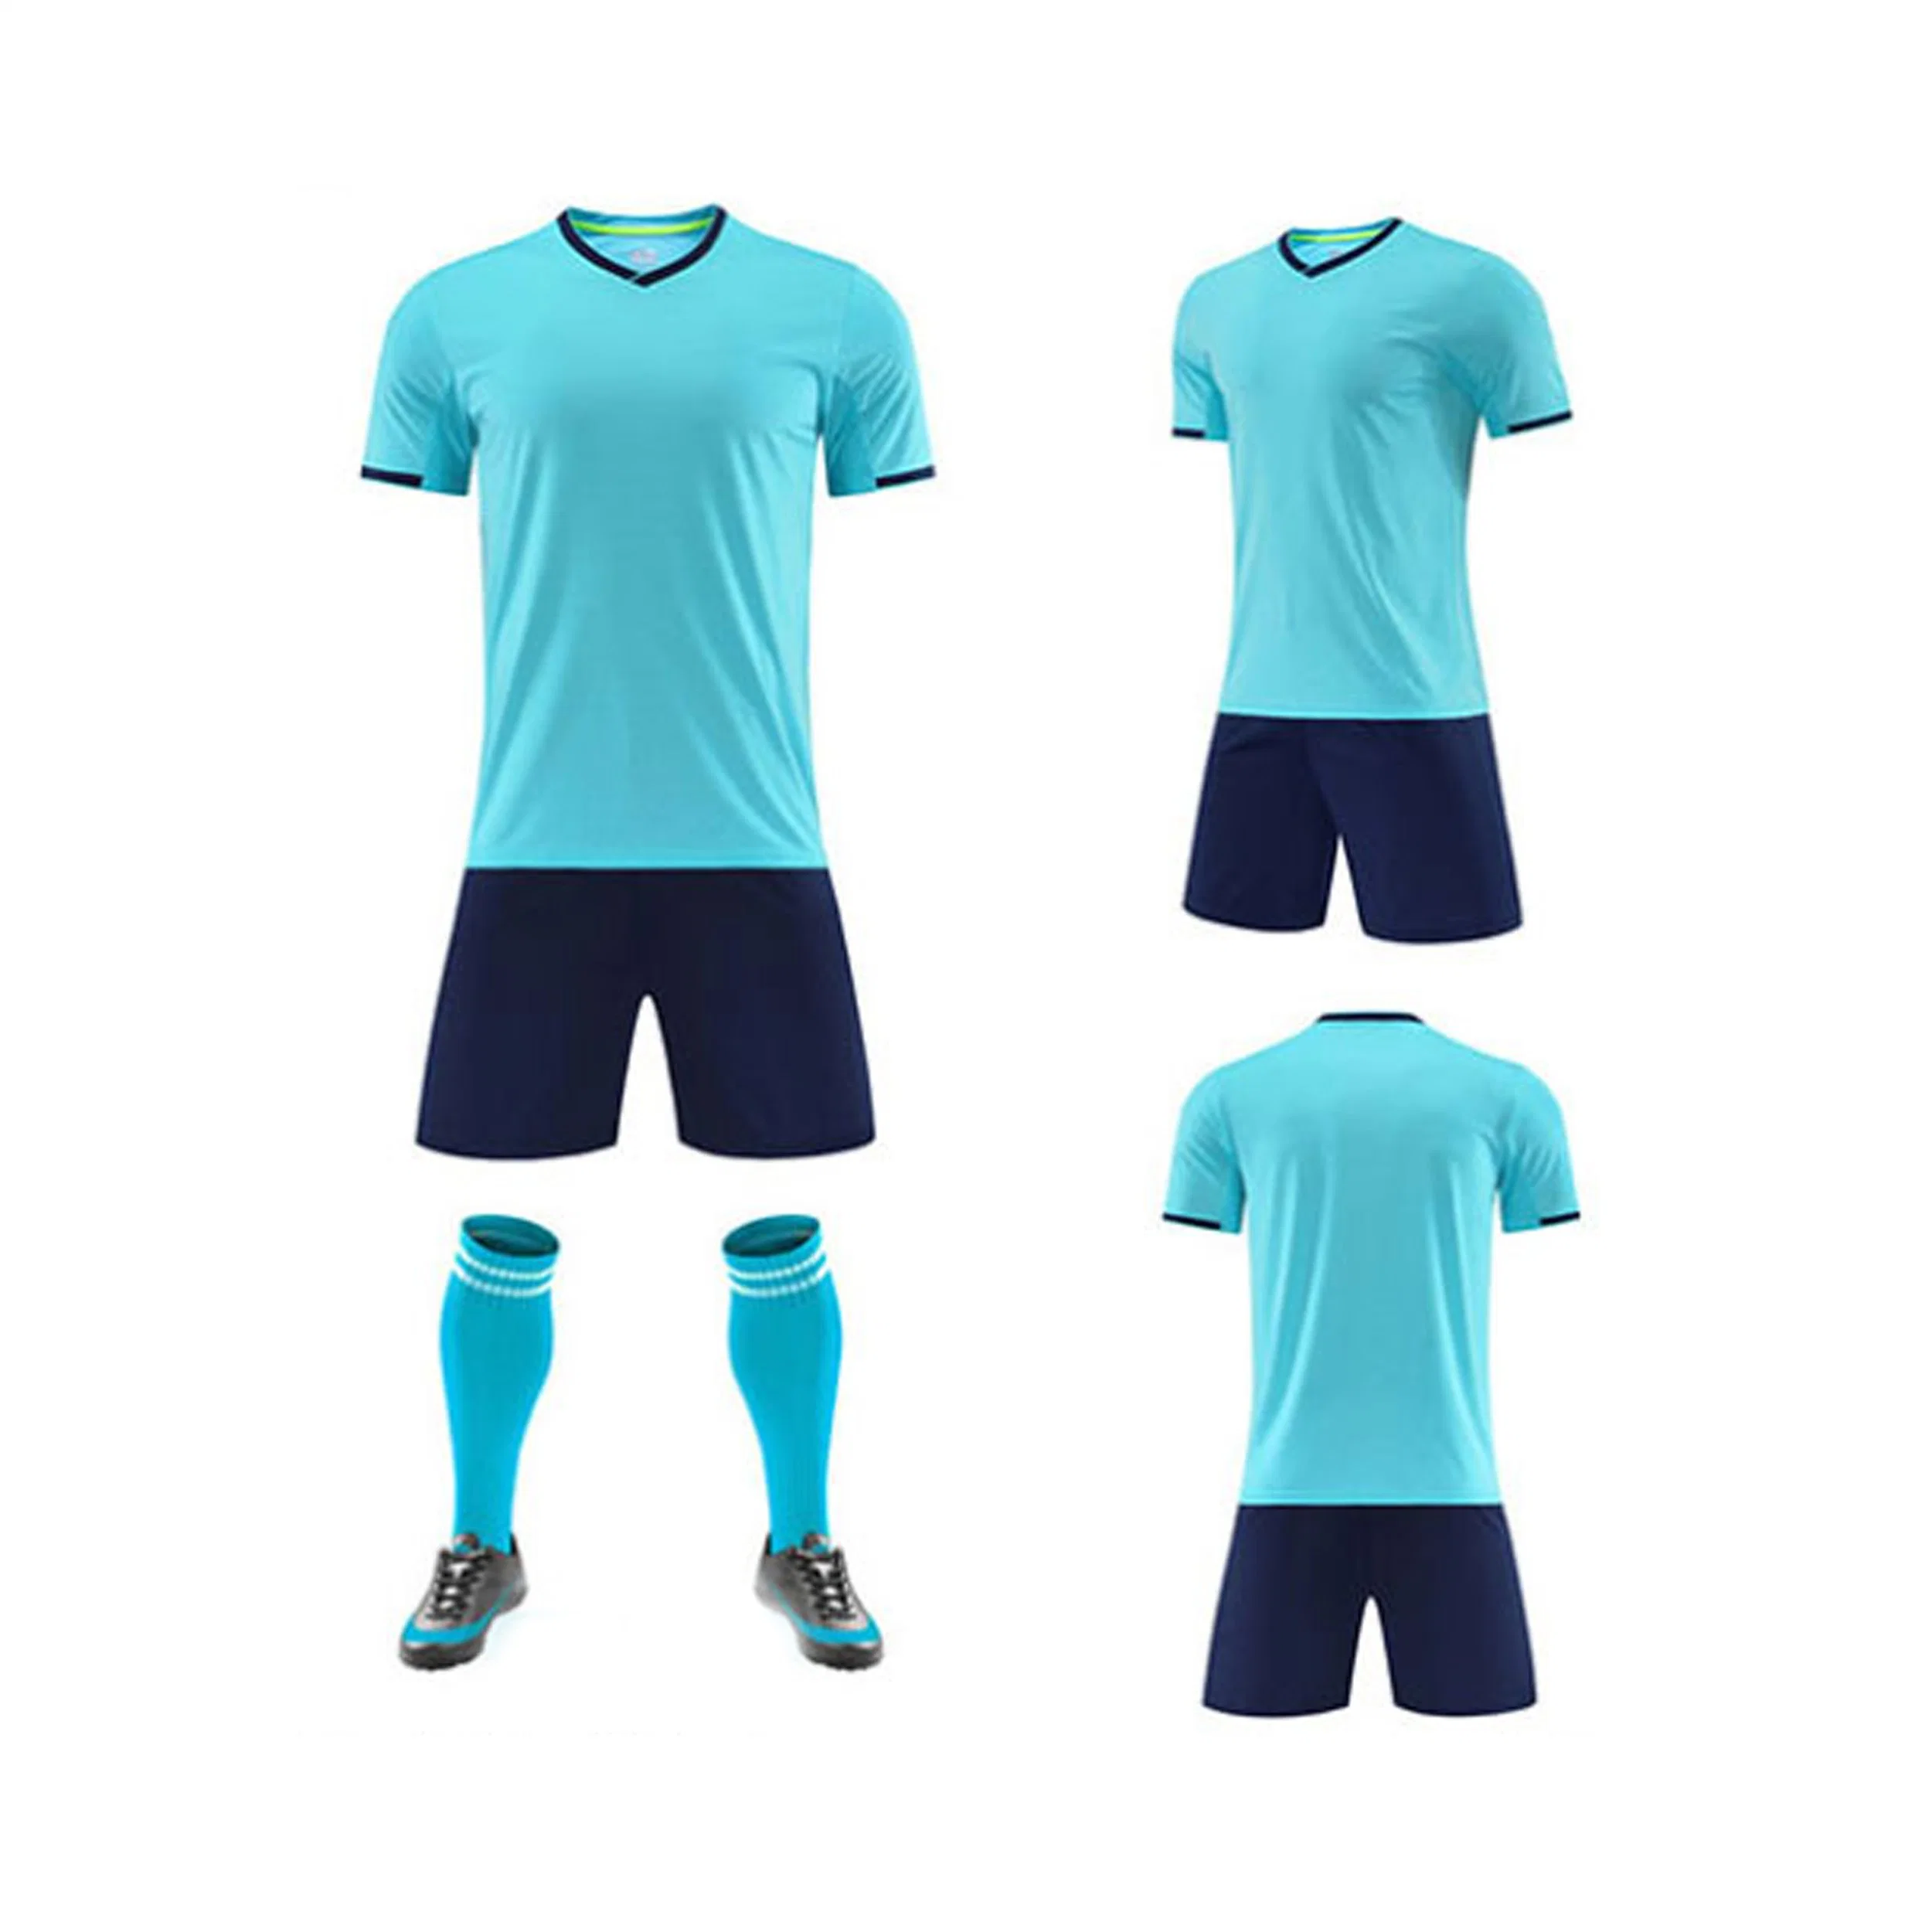 Cool and Stylish Sports Clothing